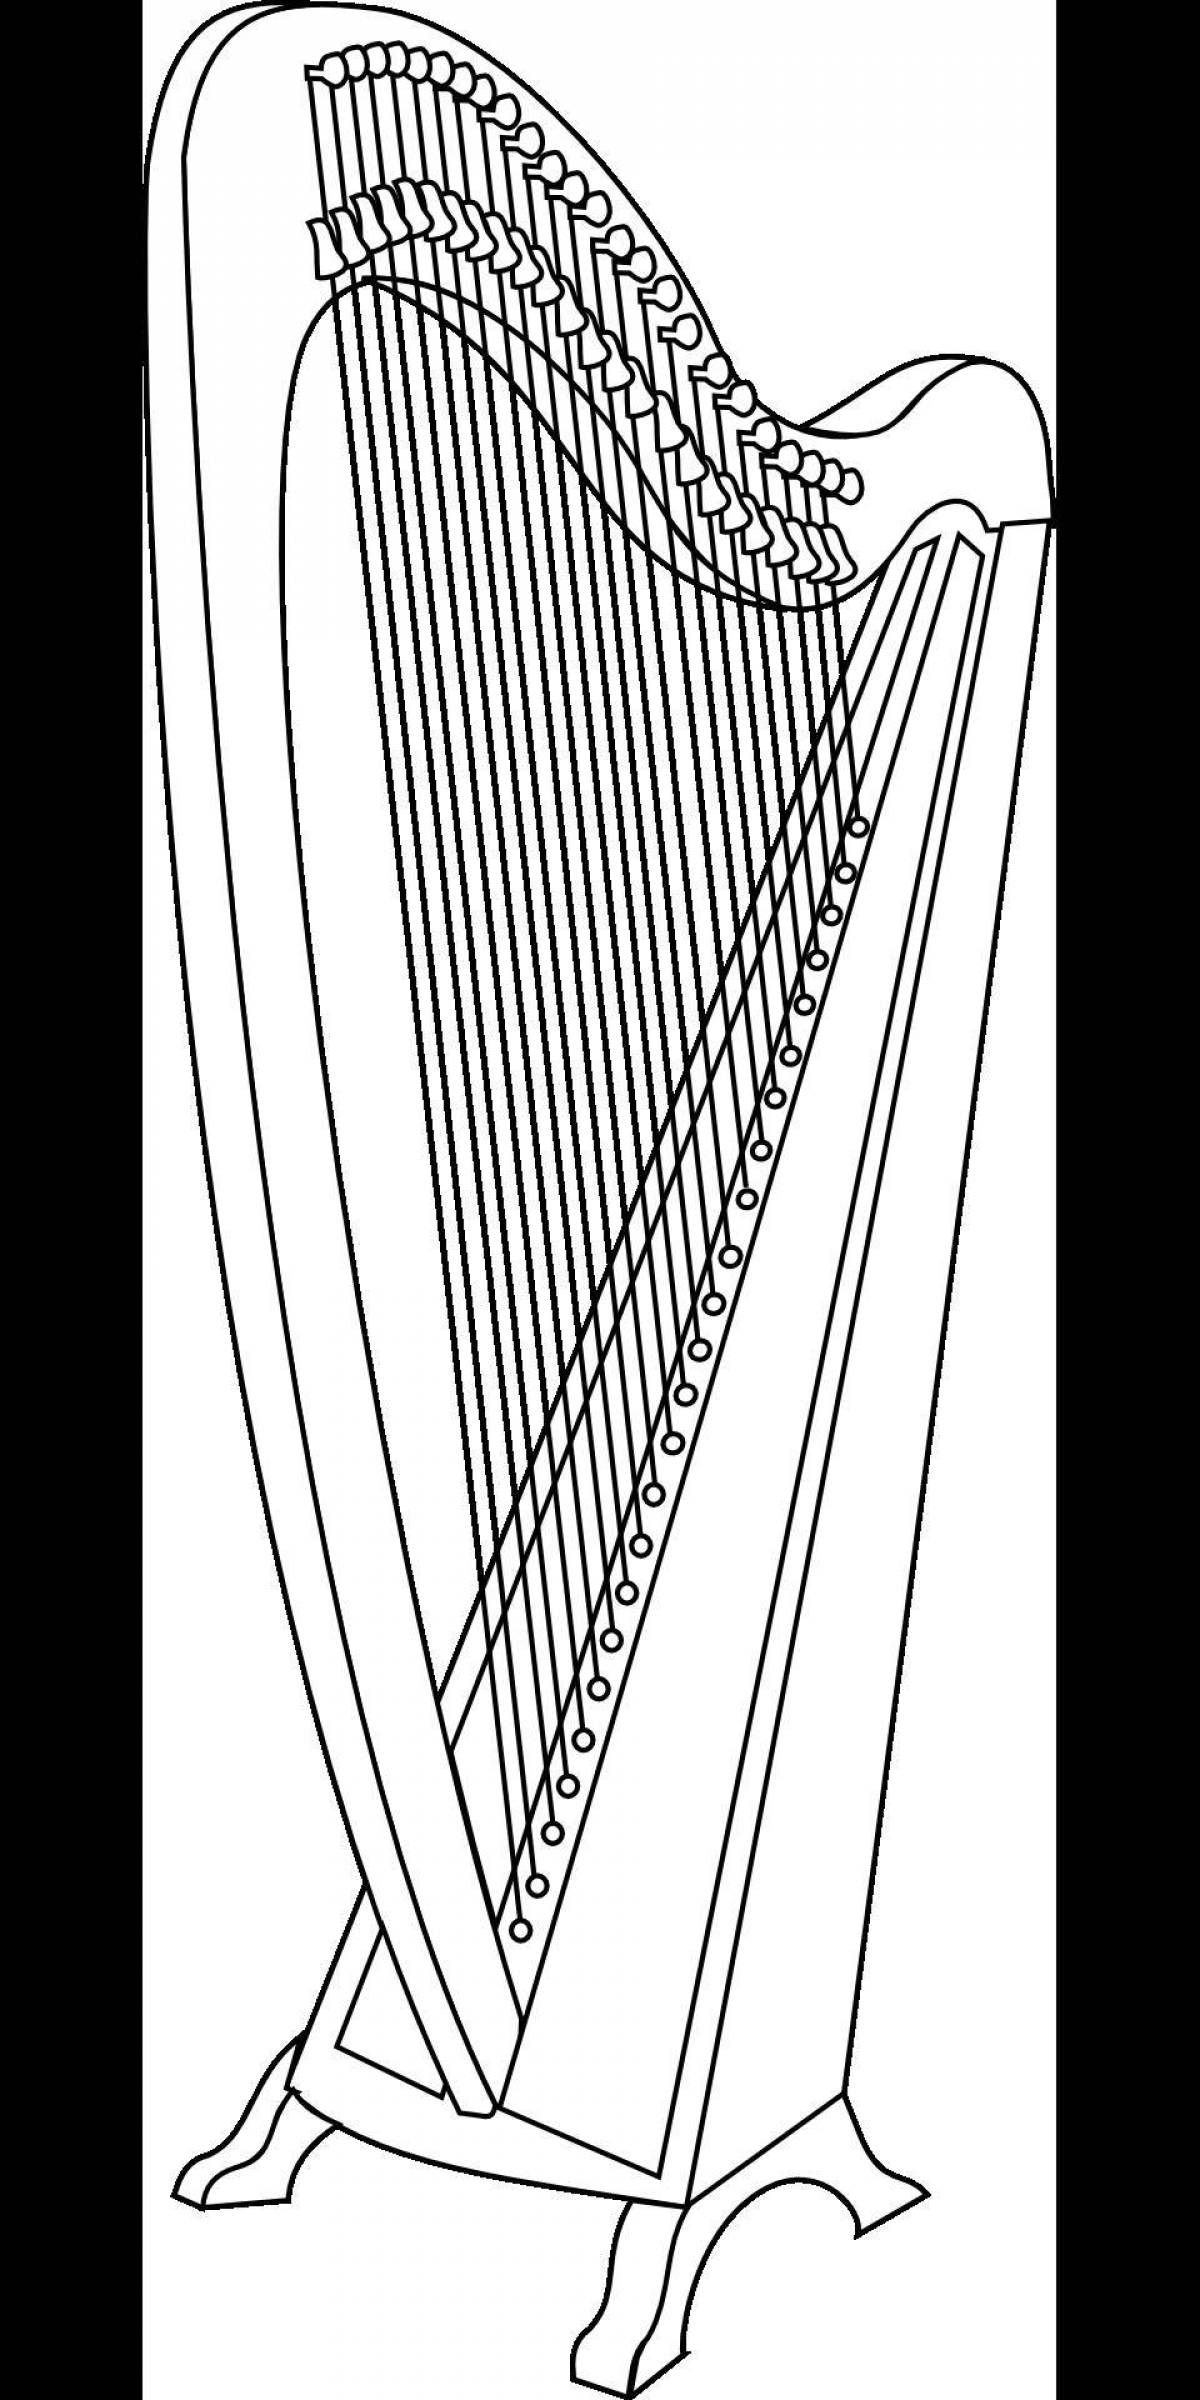 Drawing of a serene harp